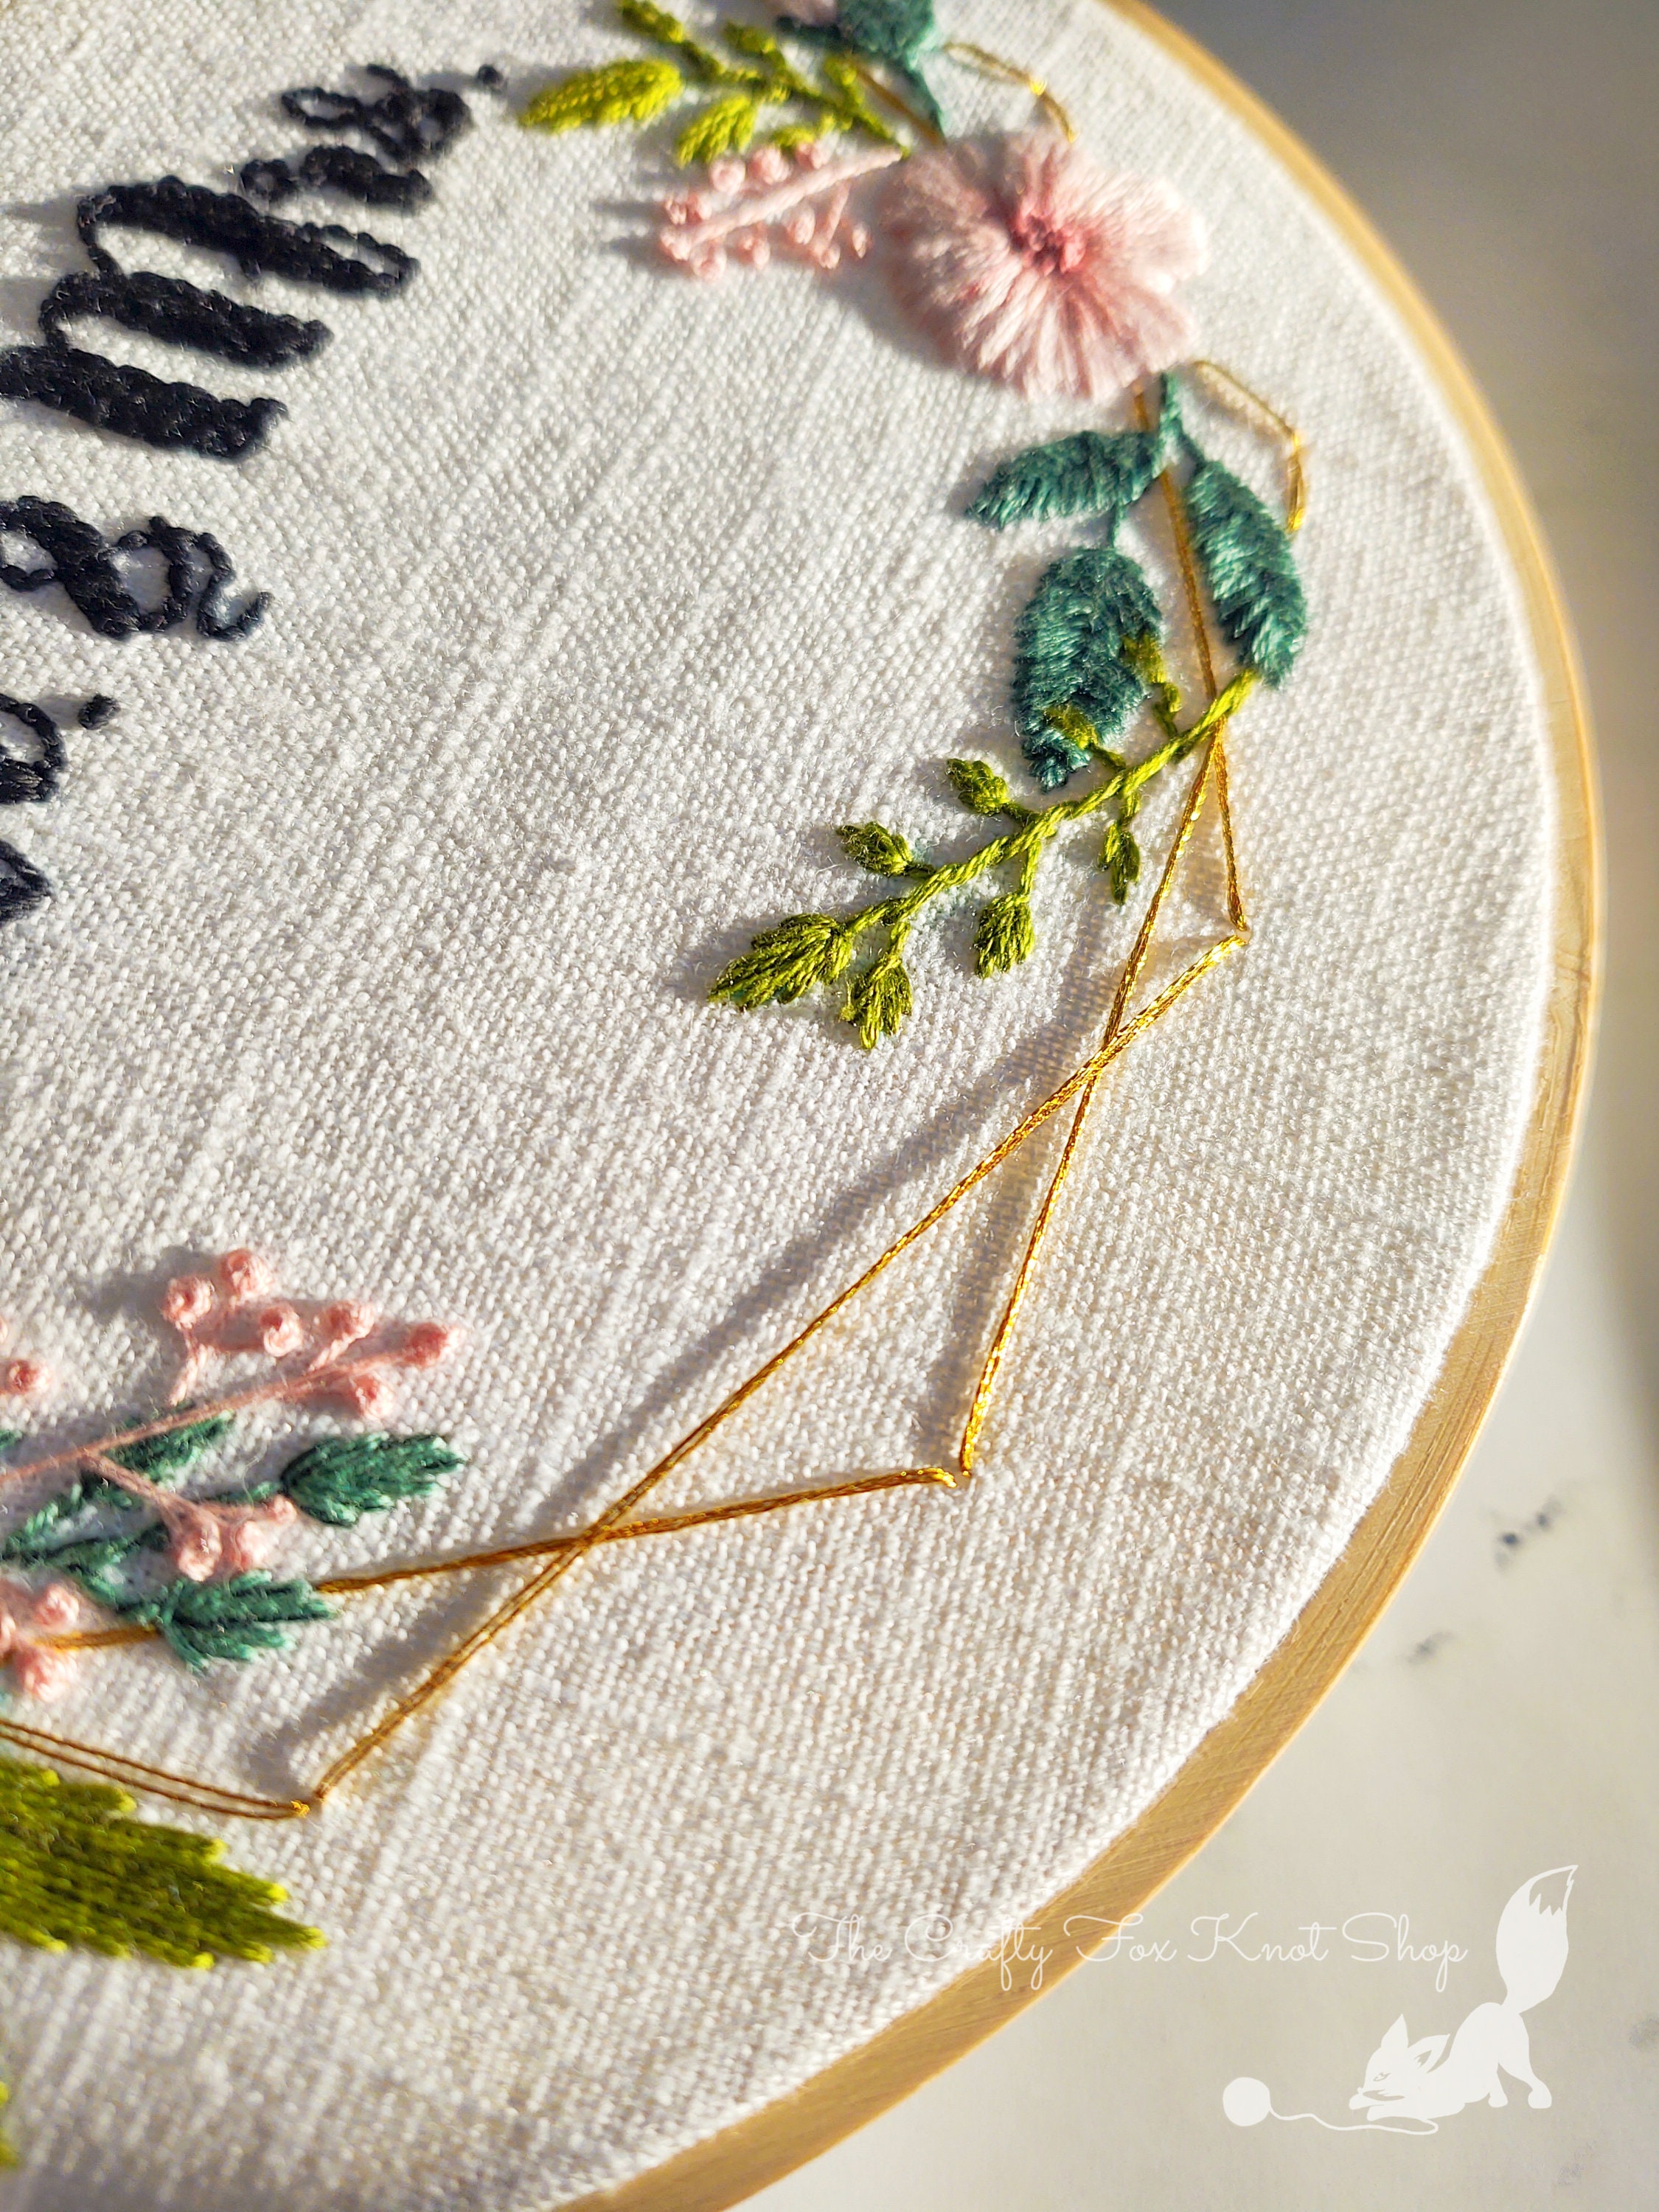 Floral Initial Embroidery Kit with Instructions– Mindful Mantra